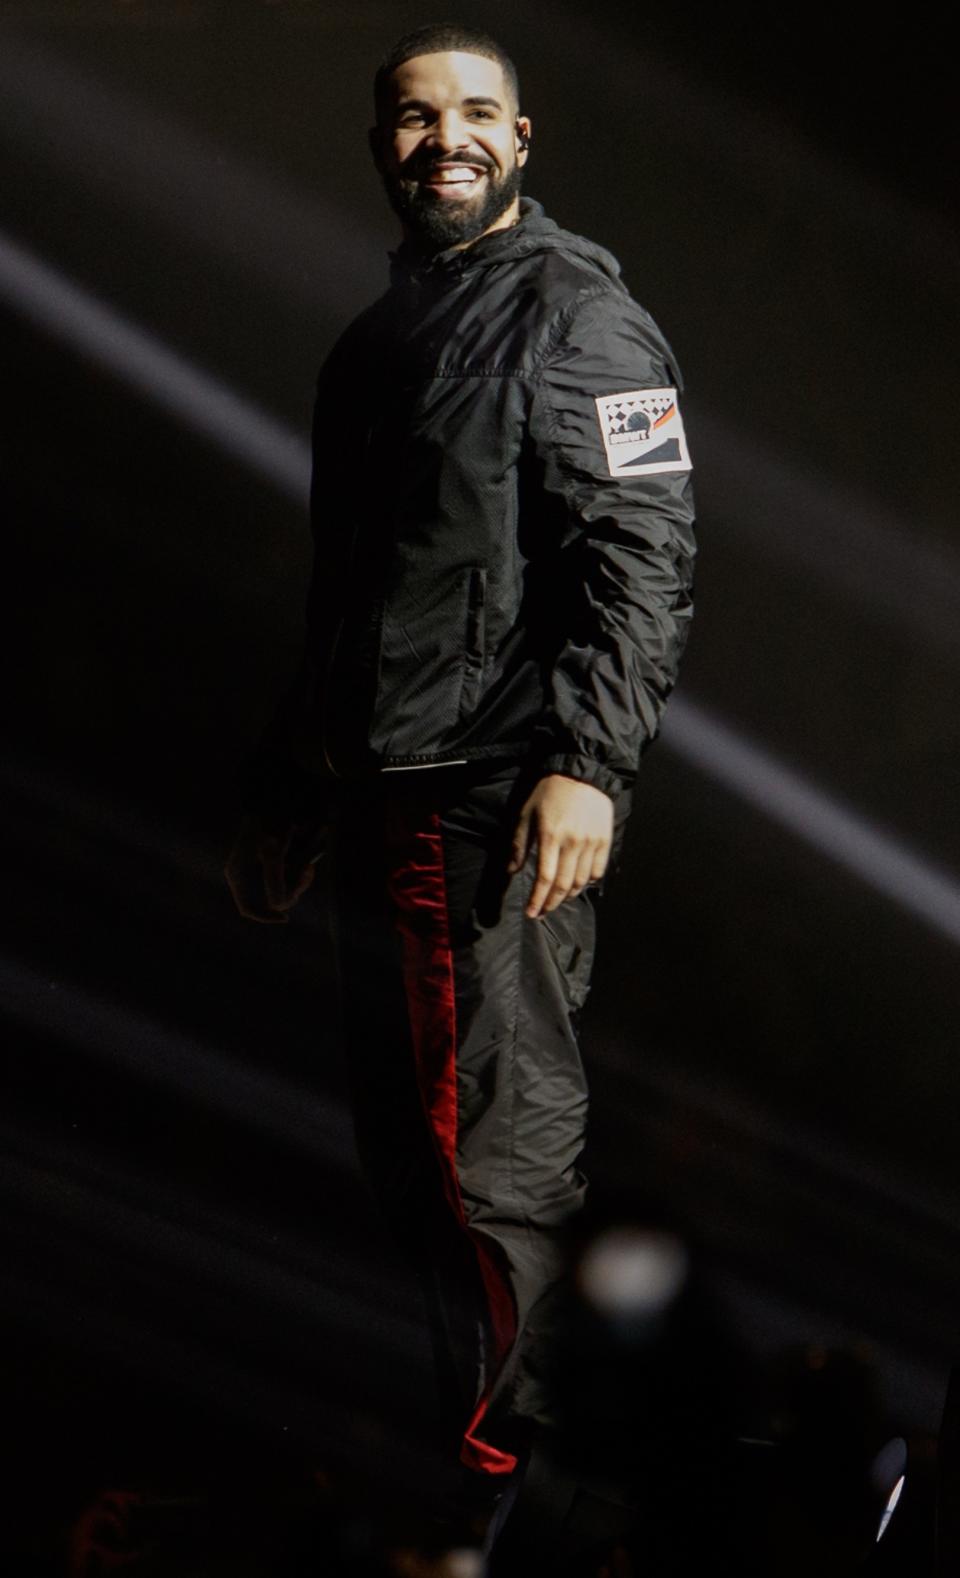 Allow windsuit champion of North America, Drake, to show you how to wear one without looking like you just emerged from a Glamour Shots photo shoot at the mall.